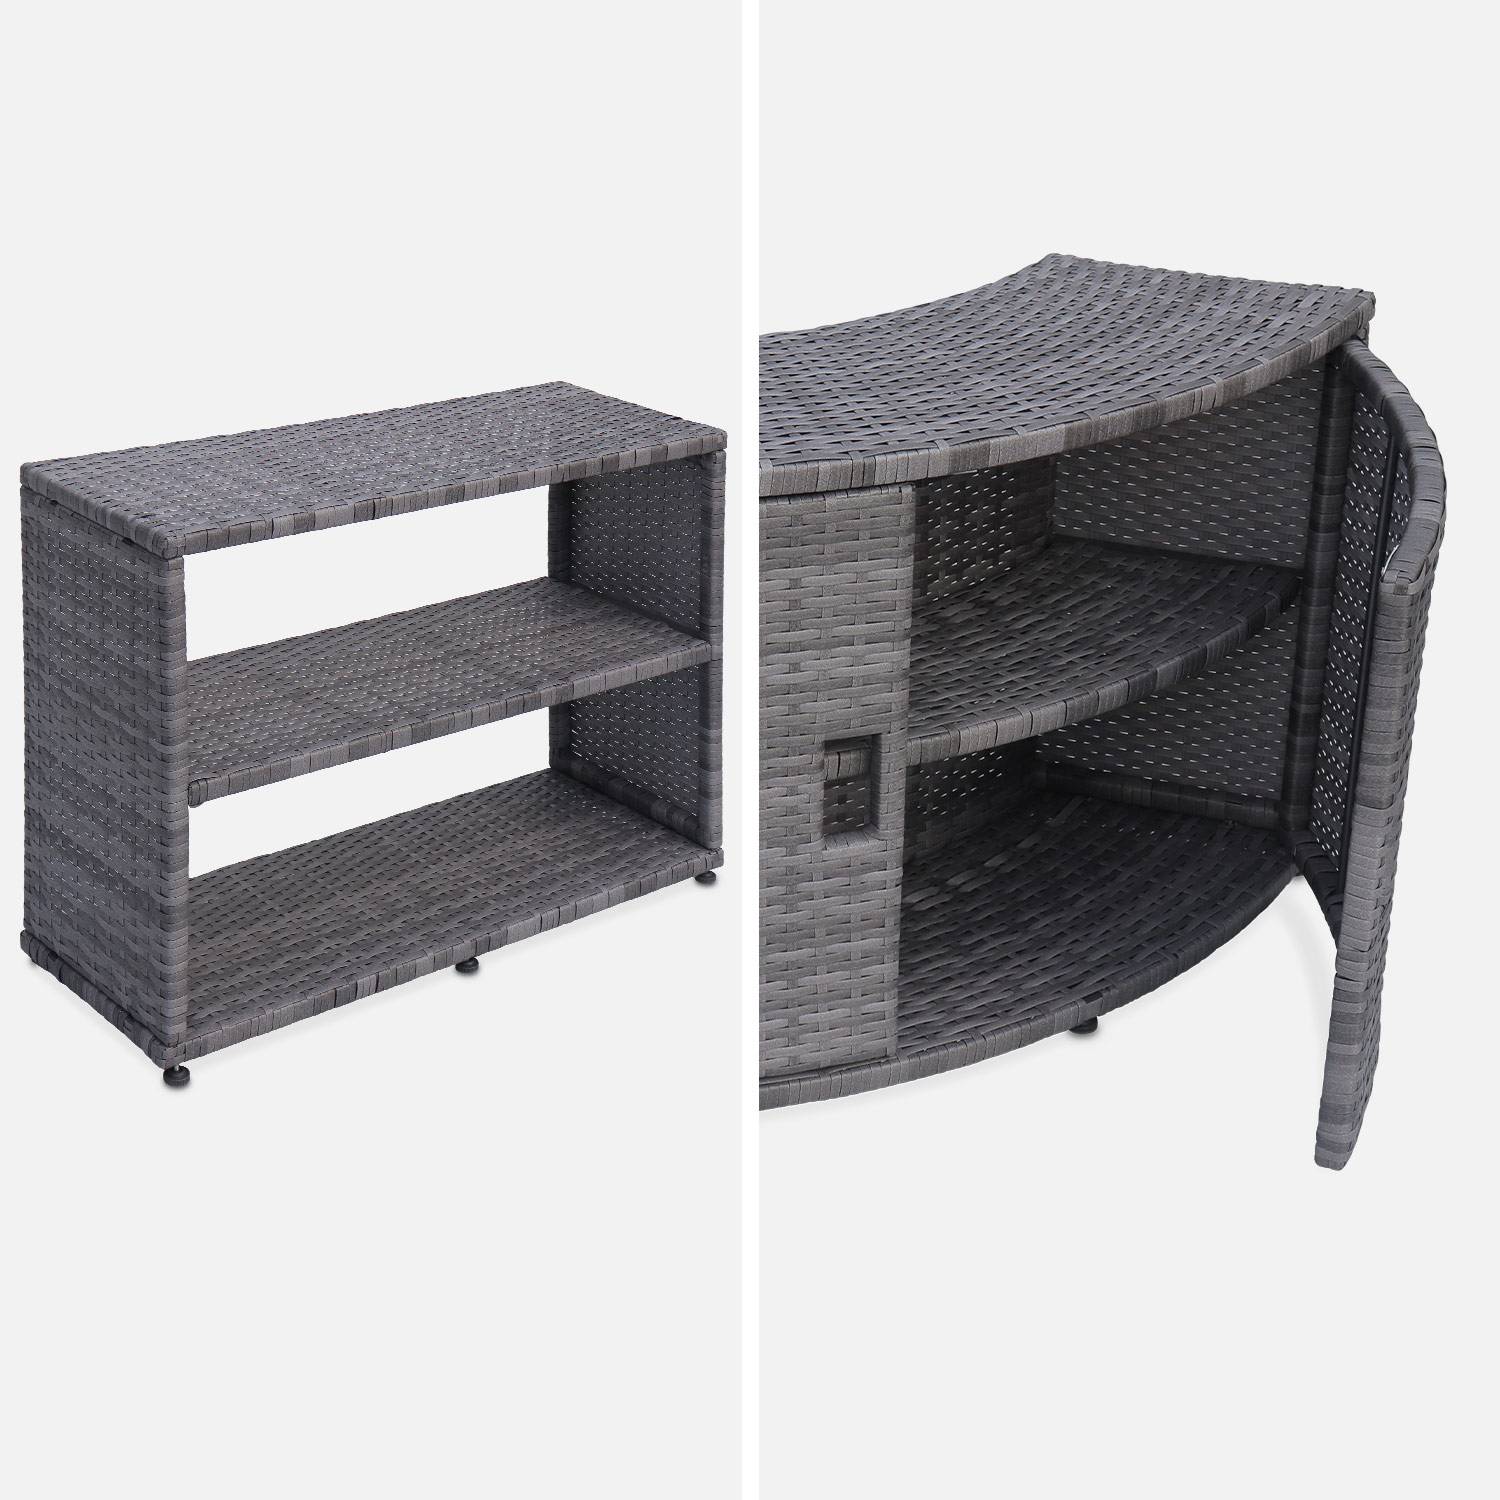 Grey polyrattan surround for square hot tub with cabinet, shelf and footstep,sweeek,Photo5